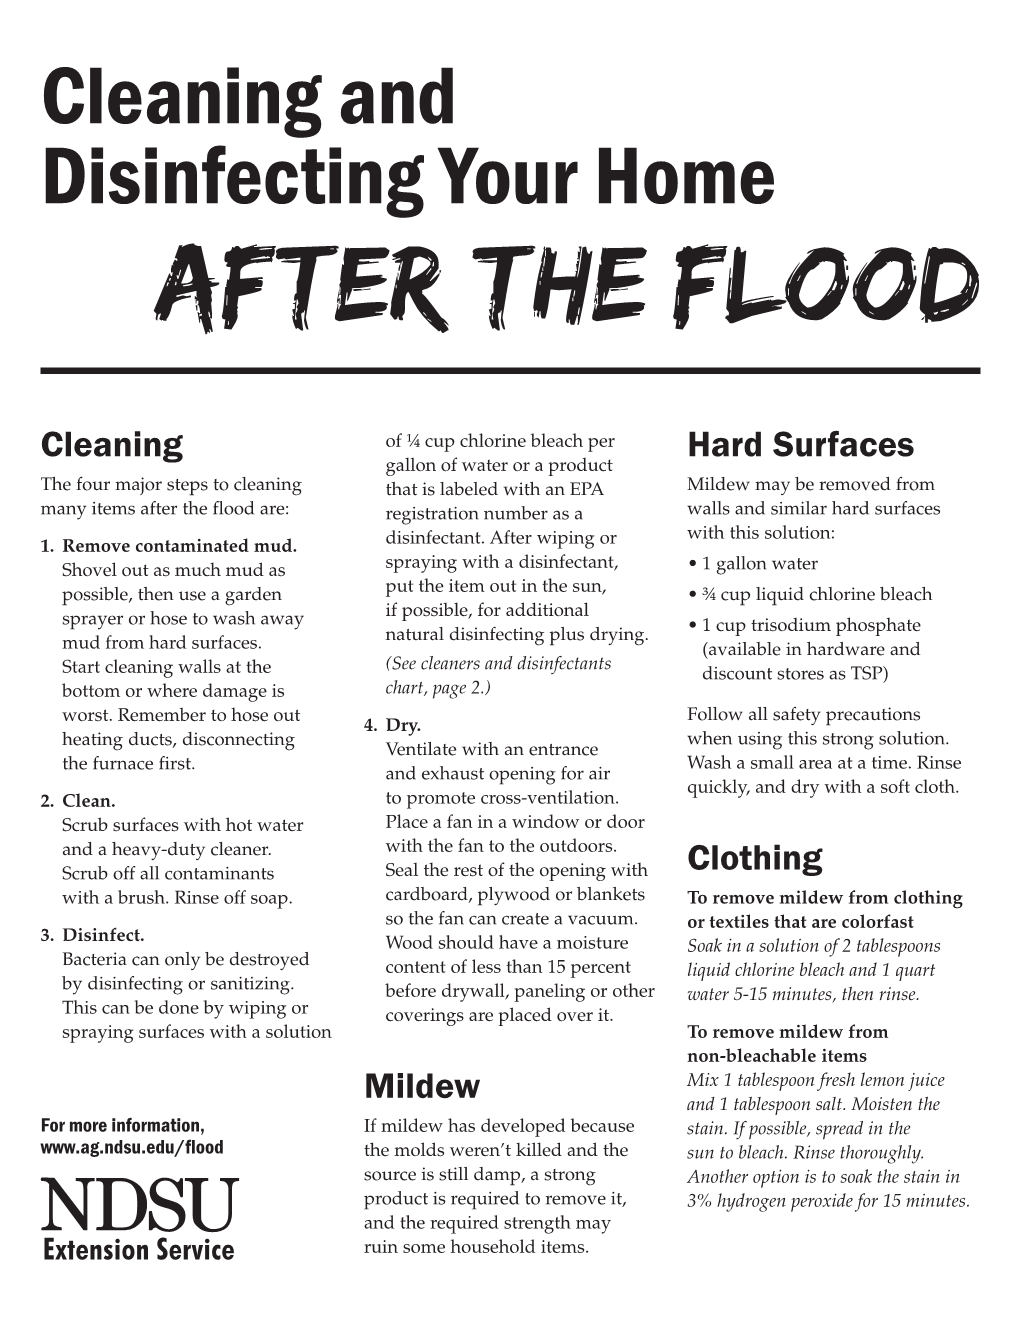 Cleaning and Disinfecting Your Home After the Flood